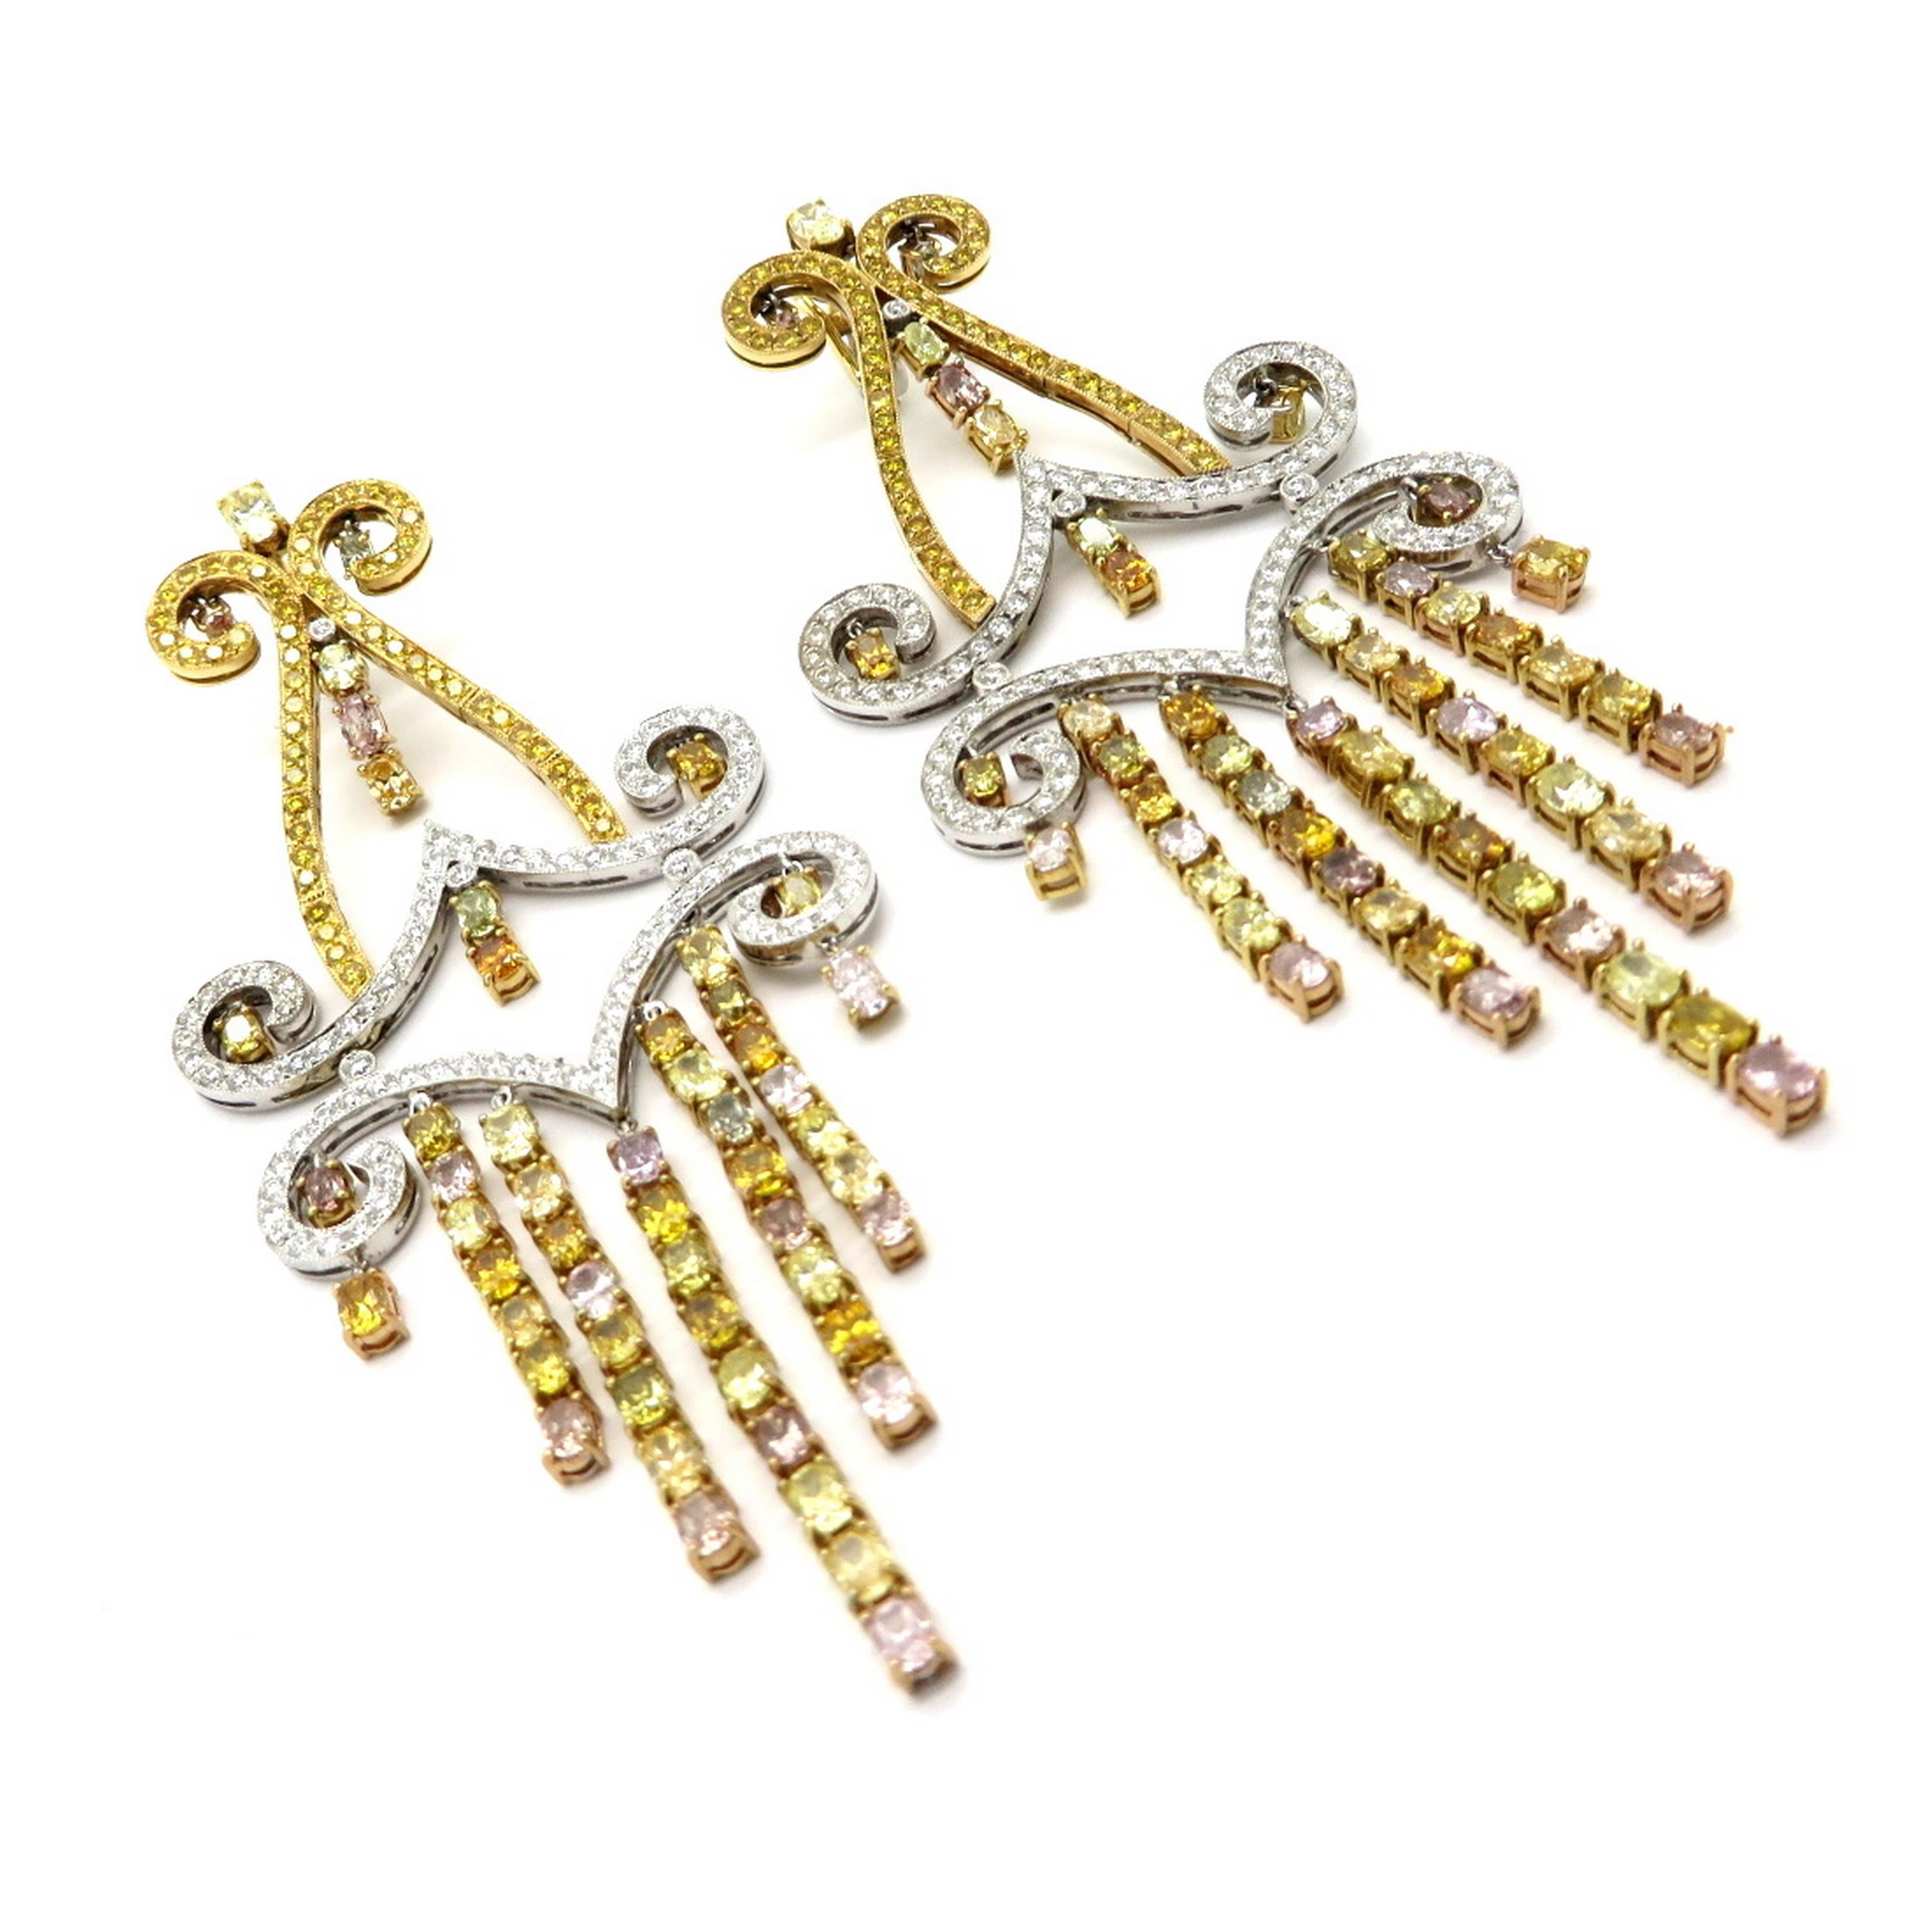 Estate 18K 16.62 carat fancy color multi shape diamond chandelier dangle earrings. Featuring numerous oval and round brilliant cut fancy yellow, fancy pink, and white diamonds, prong and bead set, with various measurements, weighing approximately